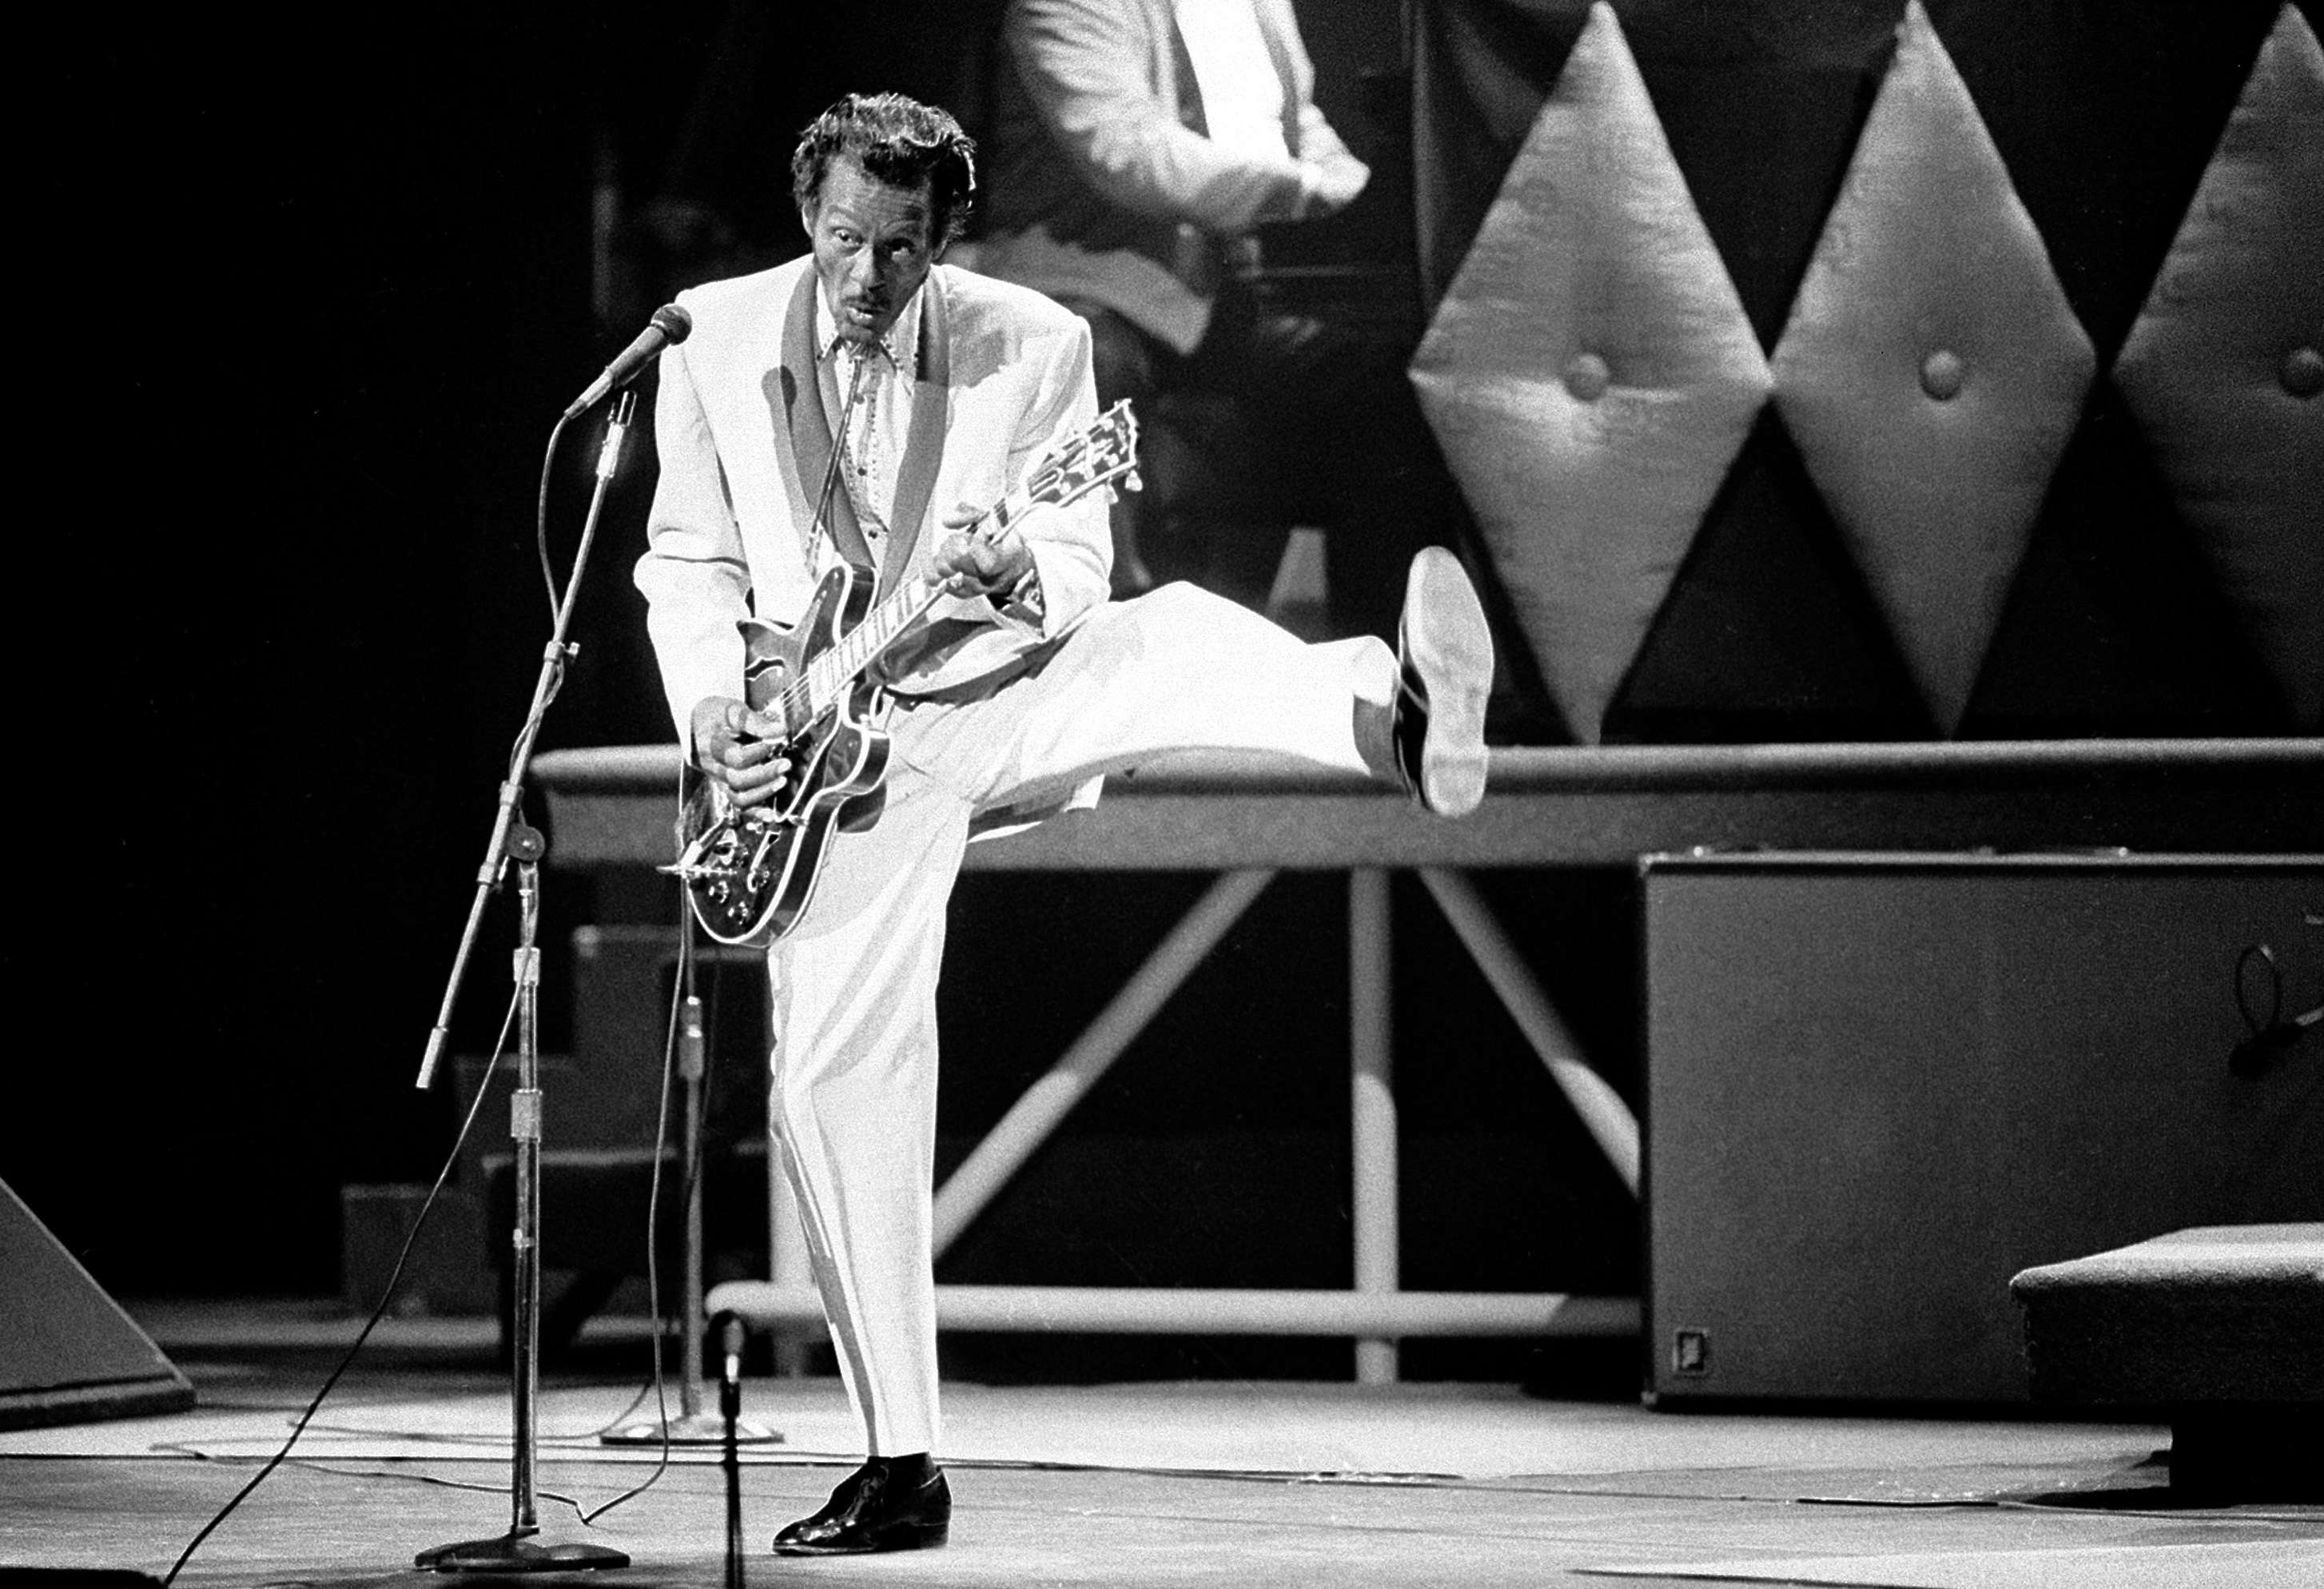 Chuck Berry was rock 'n' roll's founding guitar hero and storyteller – his  music and influence will last forever